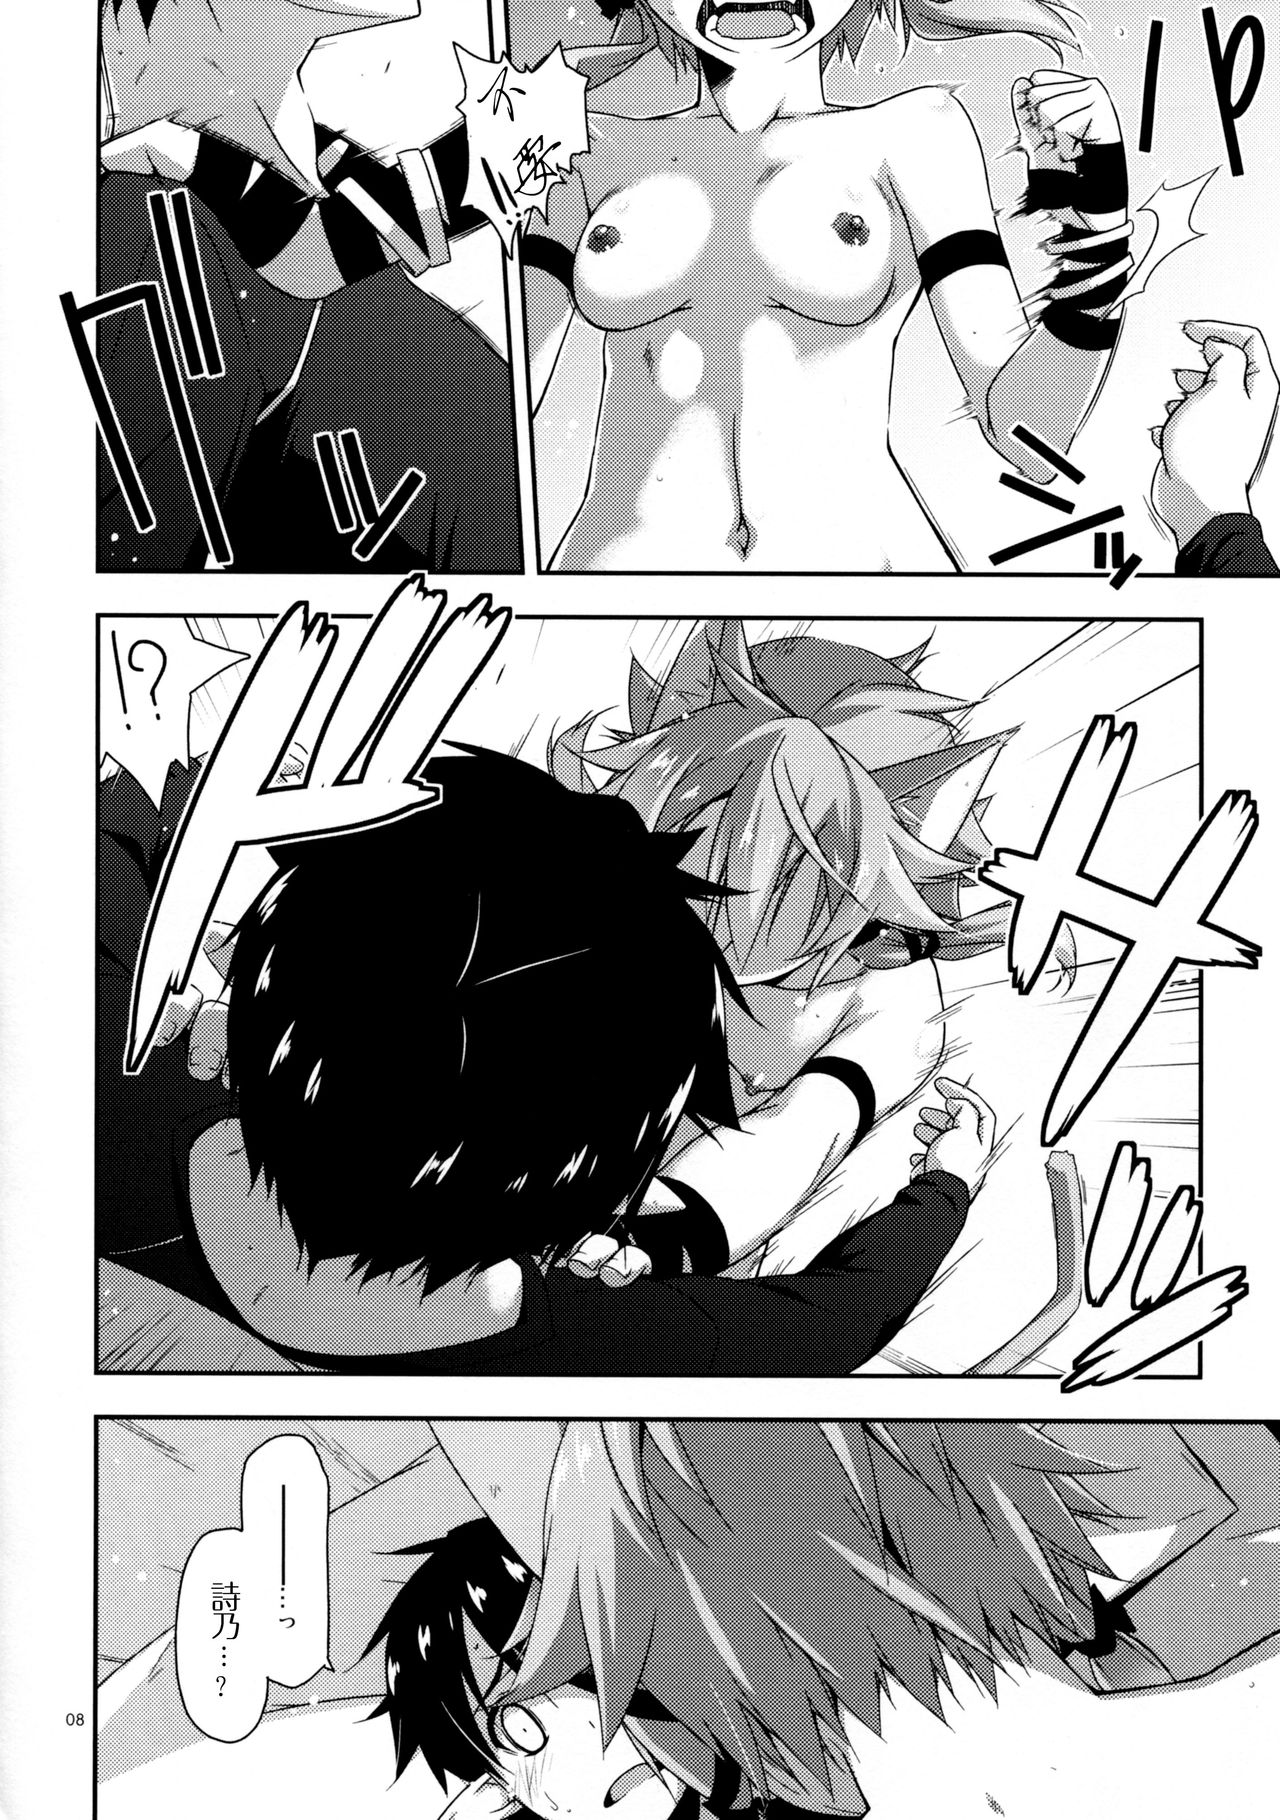 (C90) [Angyadow (Shikei)] Case closed. (Sword Art Online) [Chinese] [嗶咔嗶咔漢化組] page 9 full